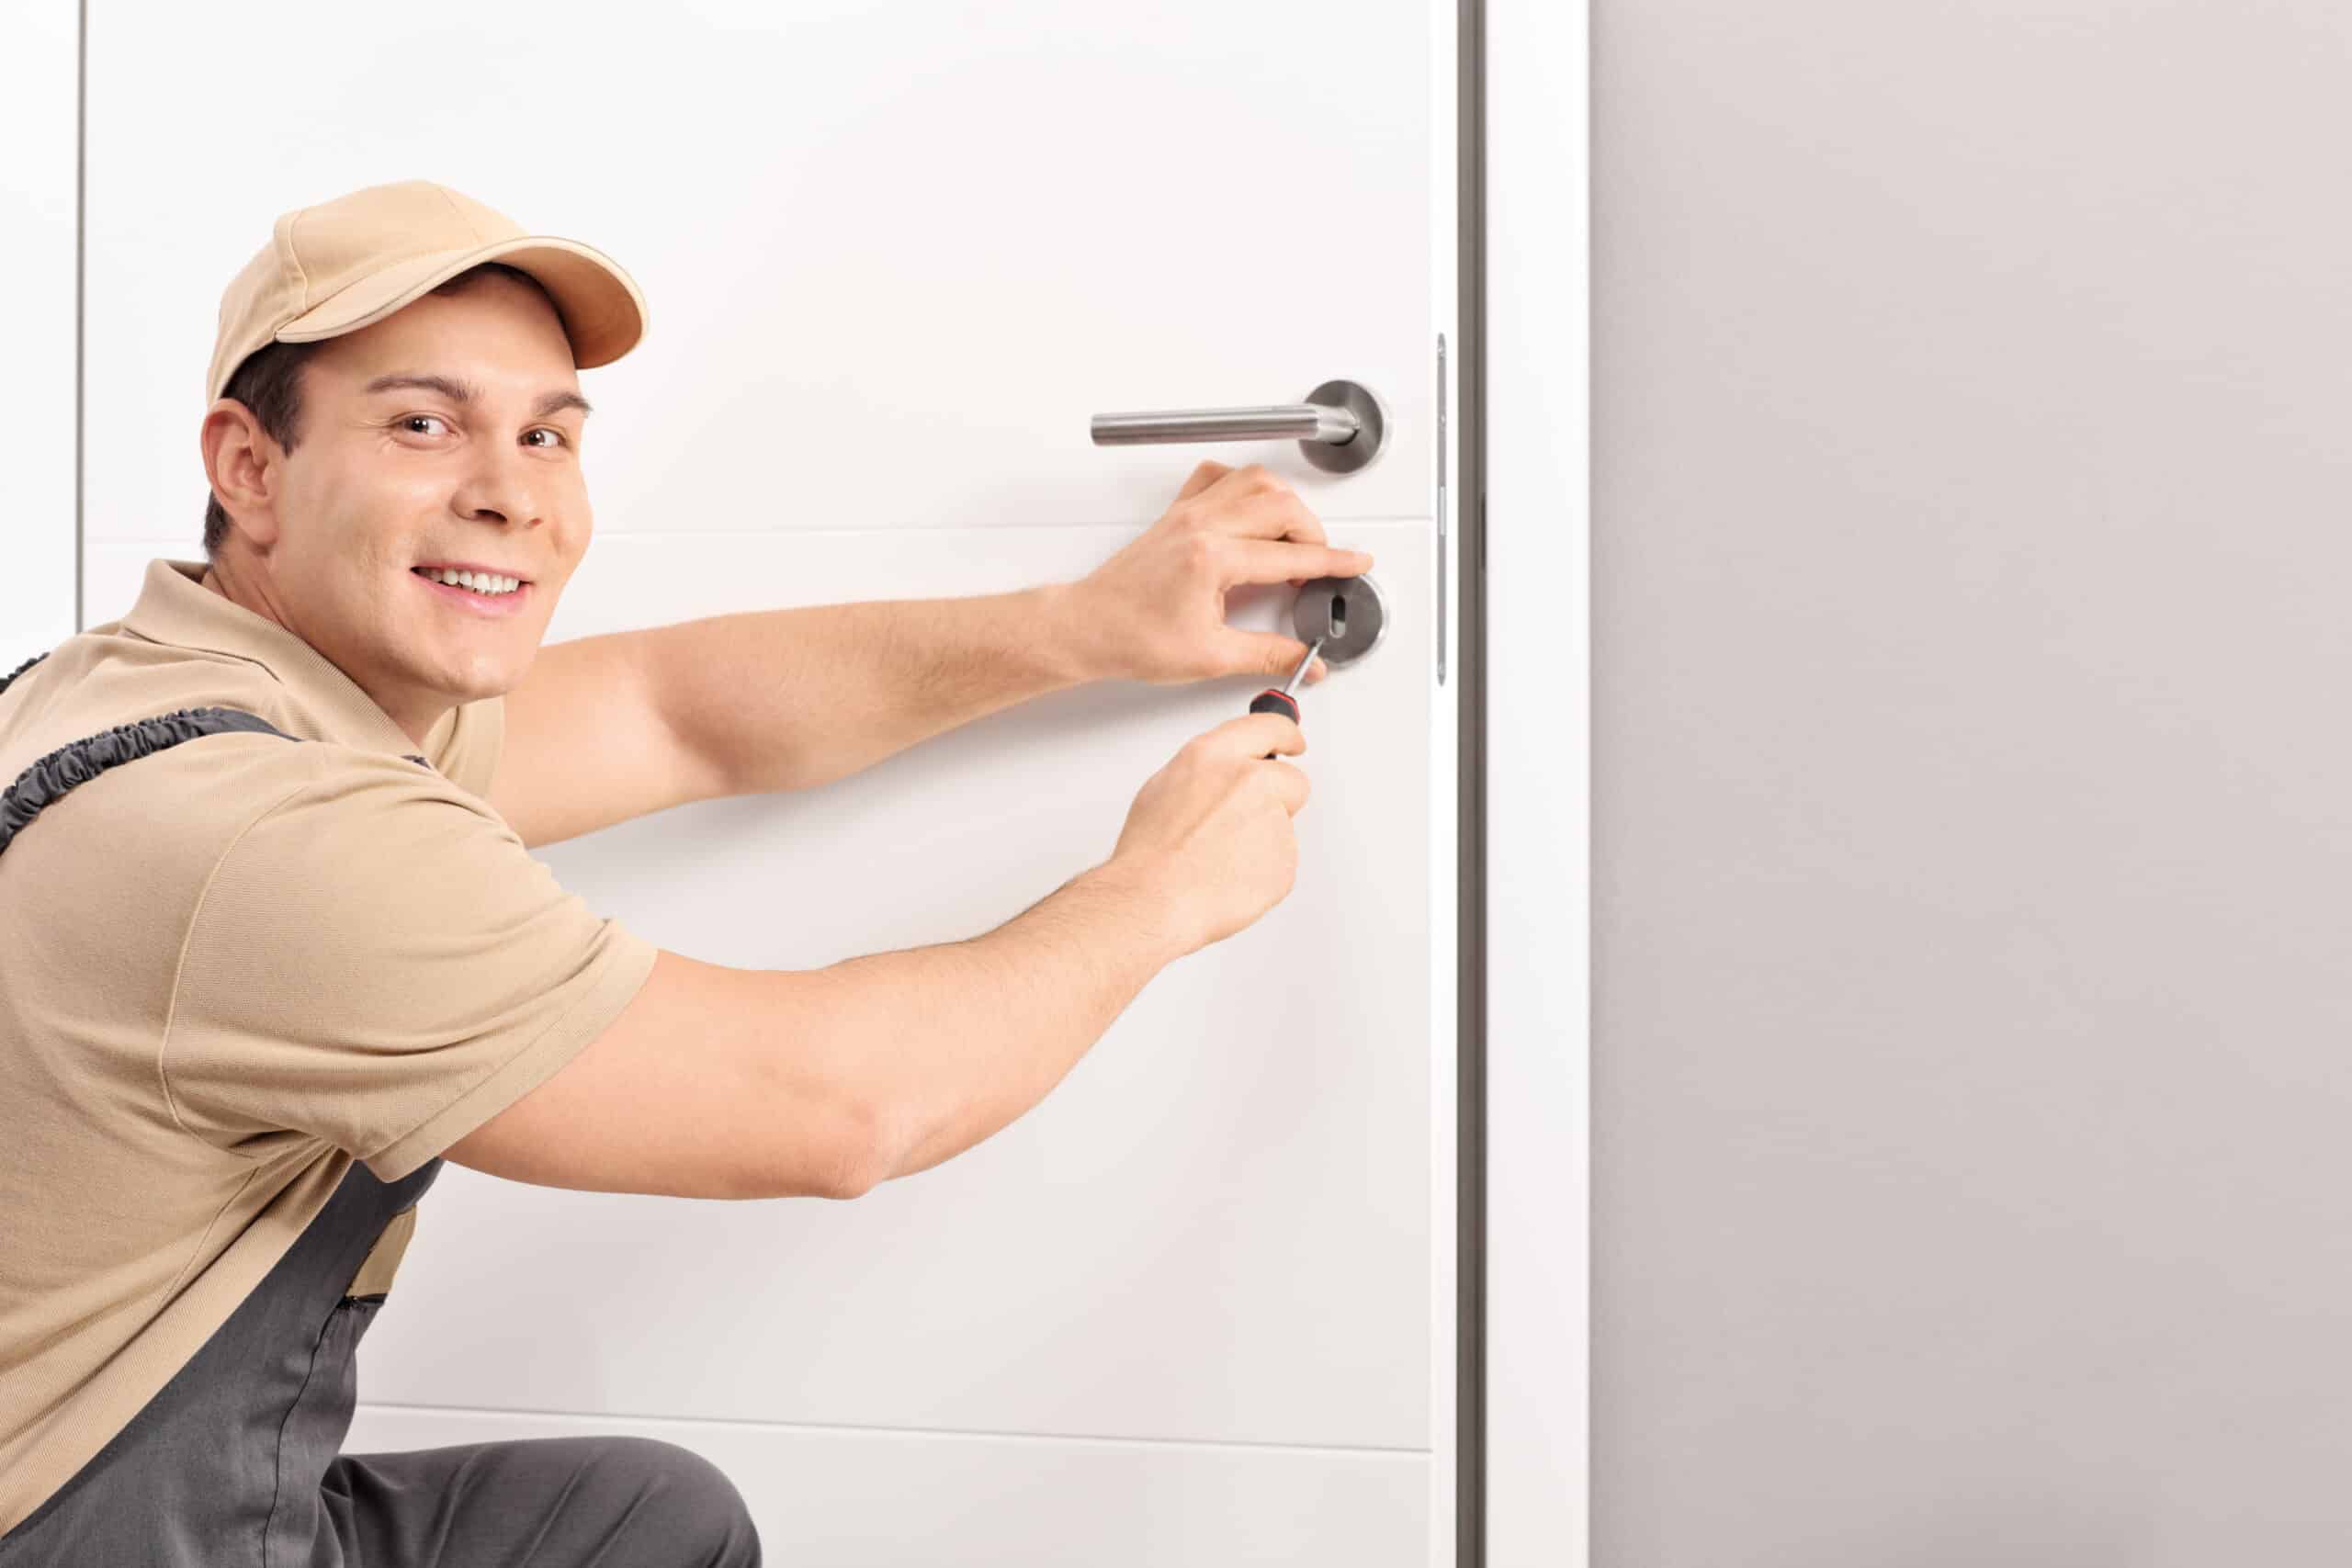 Locksmith Services in Indian Trail: How to Choose the Best One